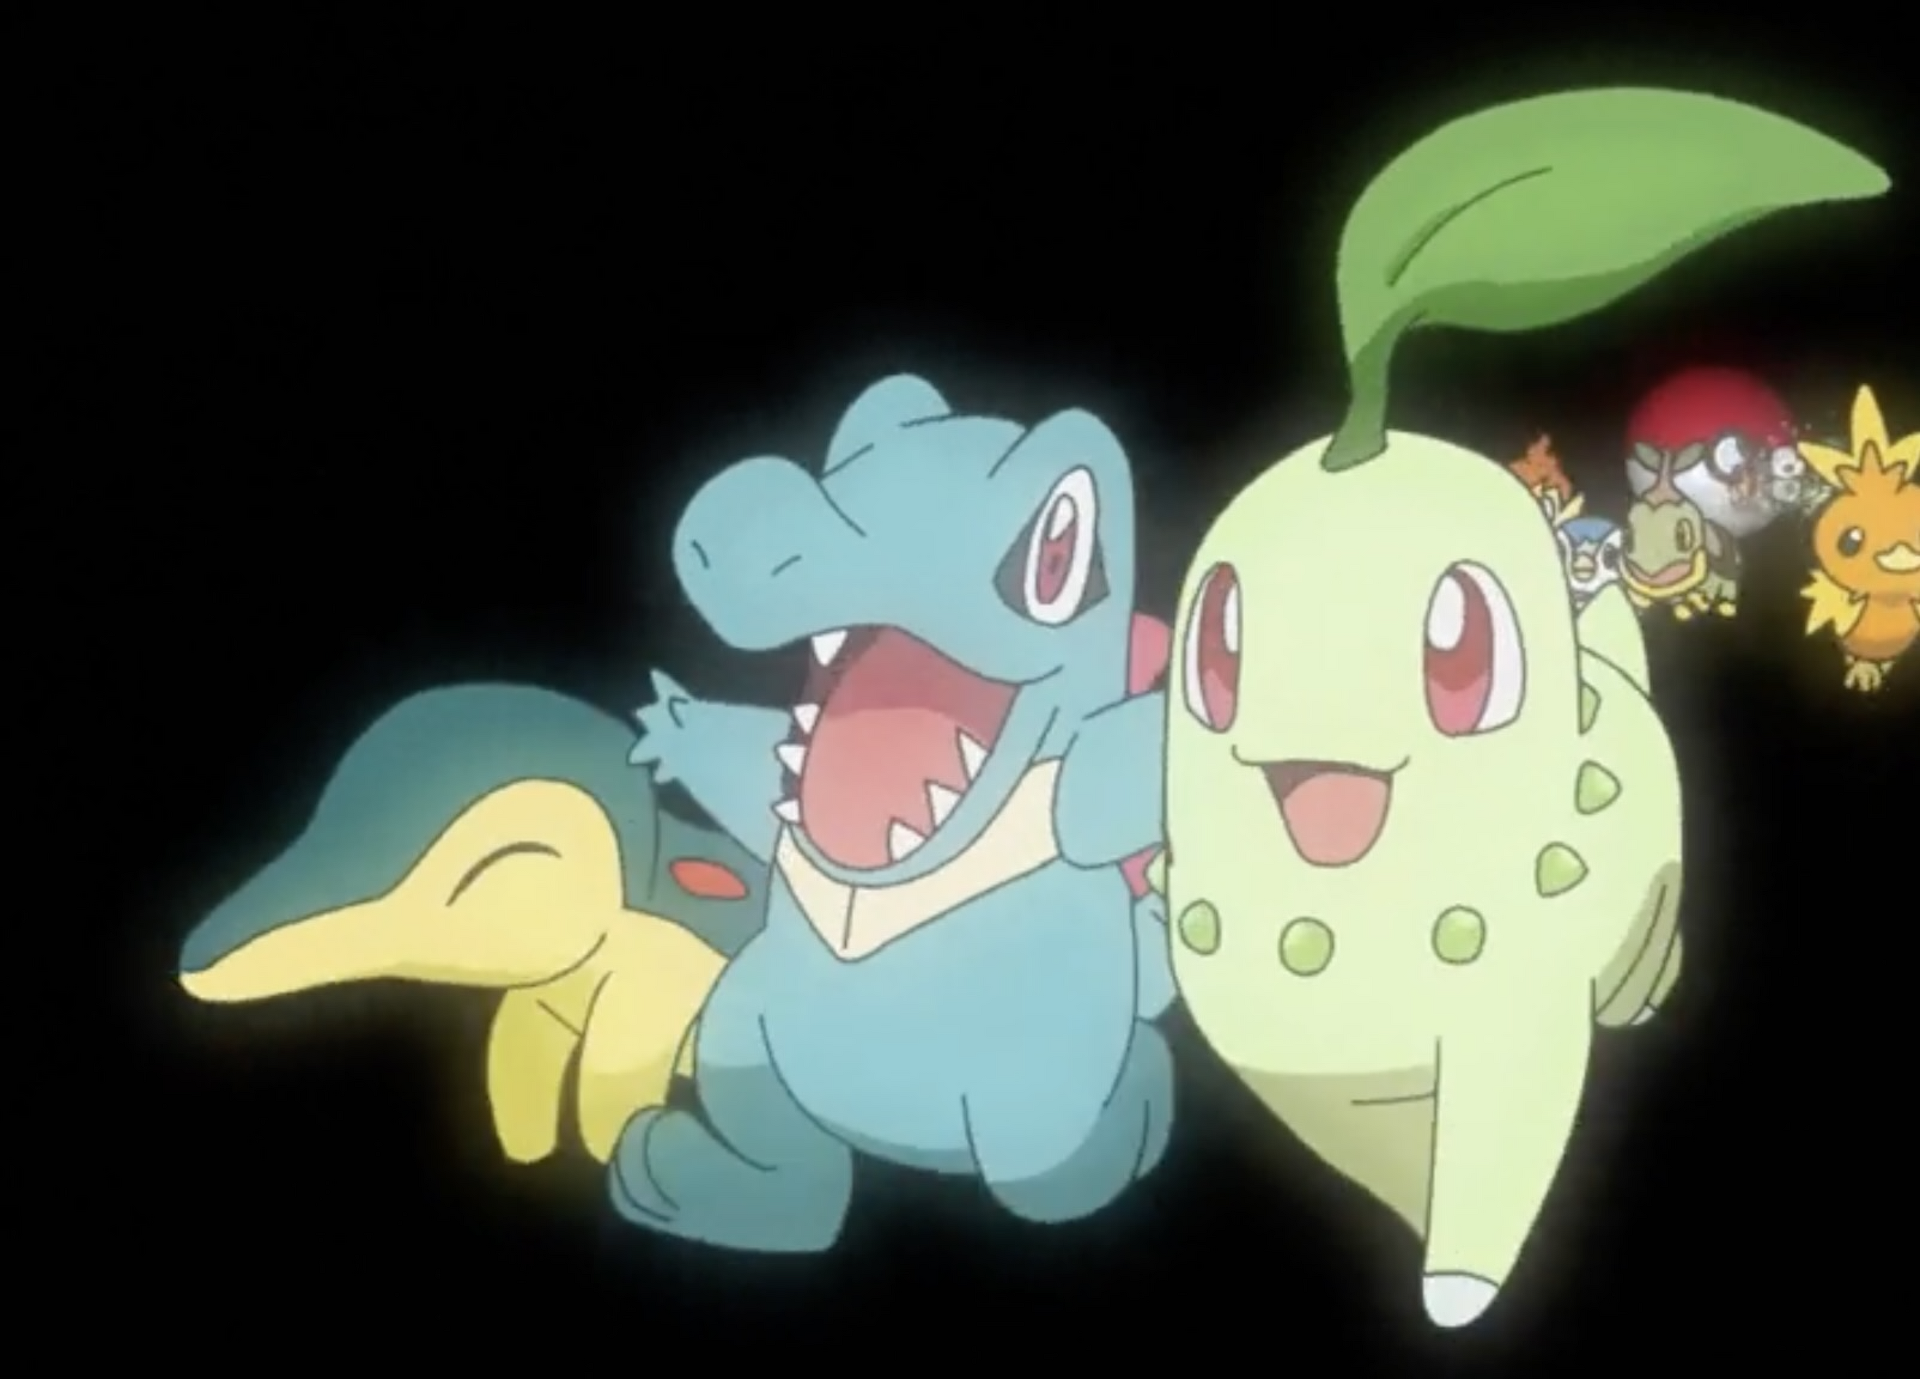 How to catch Chikorita, Totodile, and Cyndaquil in Pokemon Brilliant Diamond  and Shining Pearl